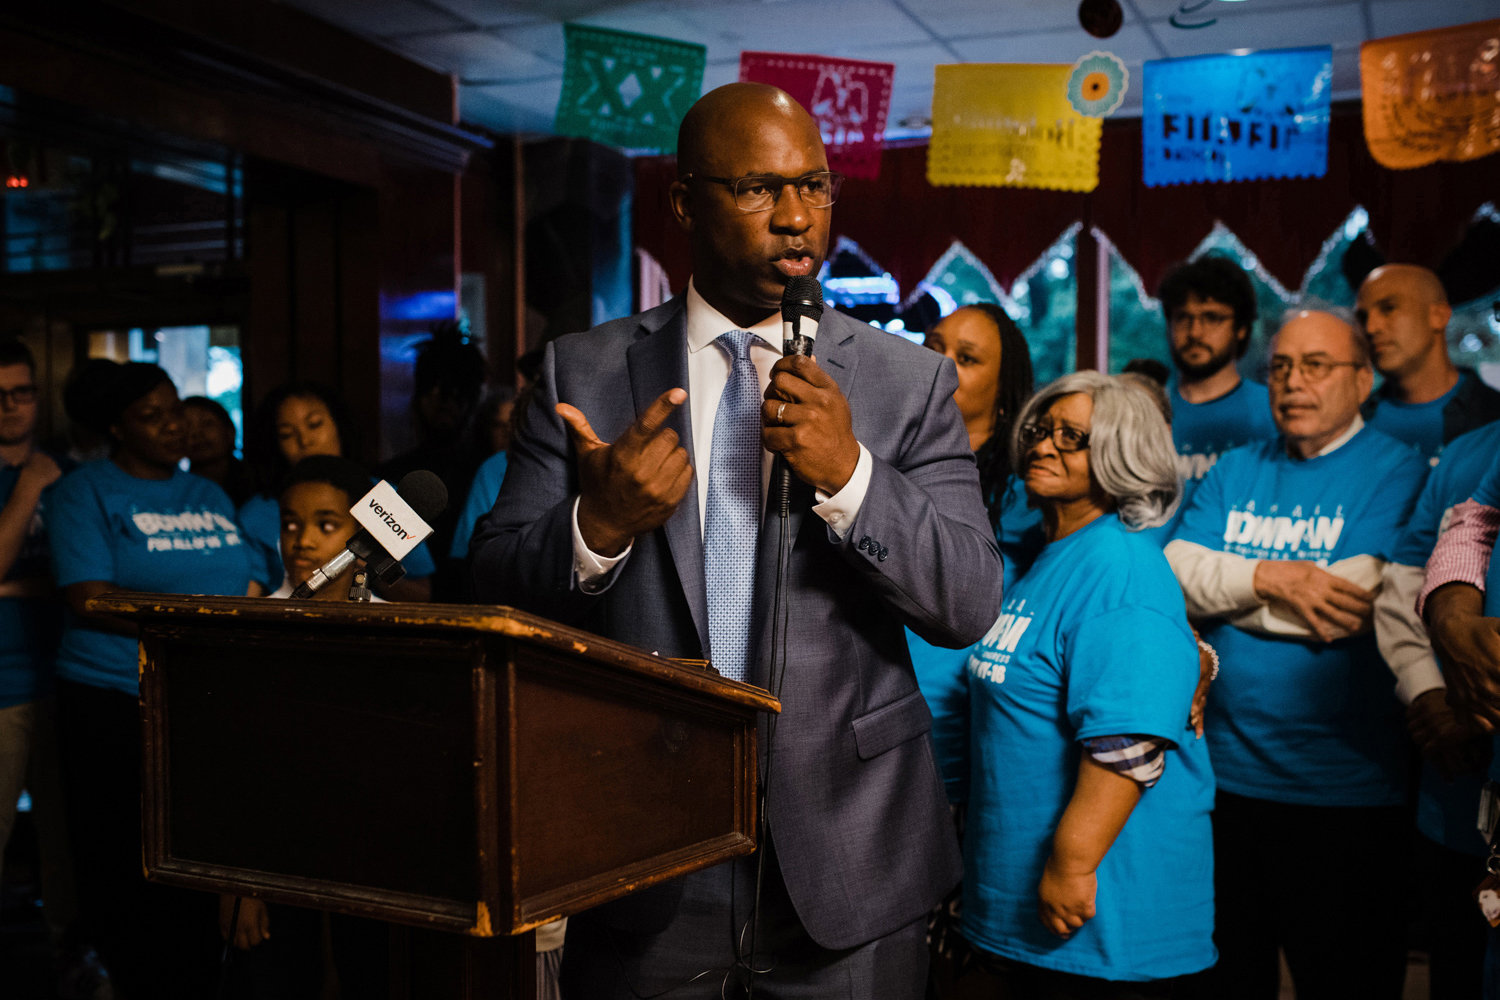 U.S. Rep. Jamaal Bowman is not exactly a happy congressman despite the passage of the Democratic-led infrastructure bill through a divided U.S. Senate. In fact, Bowman says he and other progressives may not support Joe Biden’s signature bill in the House if the Senate fails to move a budget resolution worth three times as much.